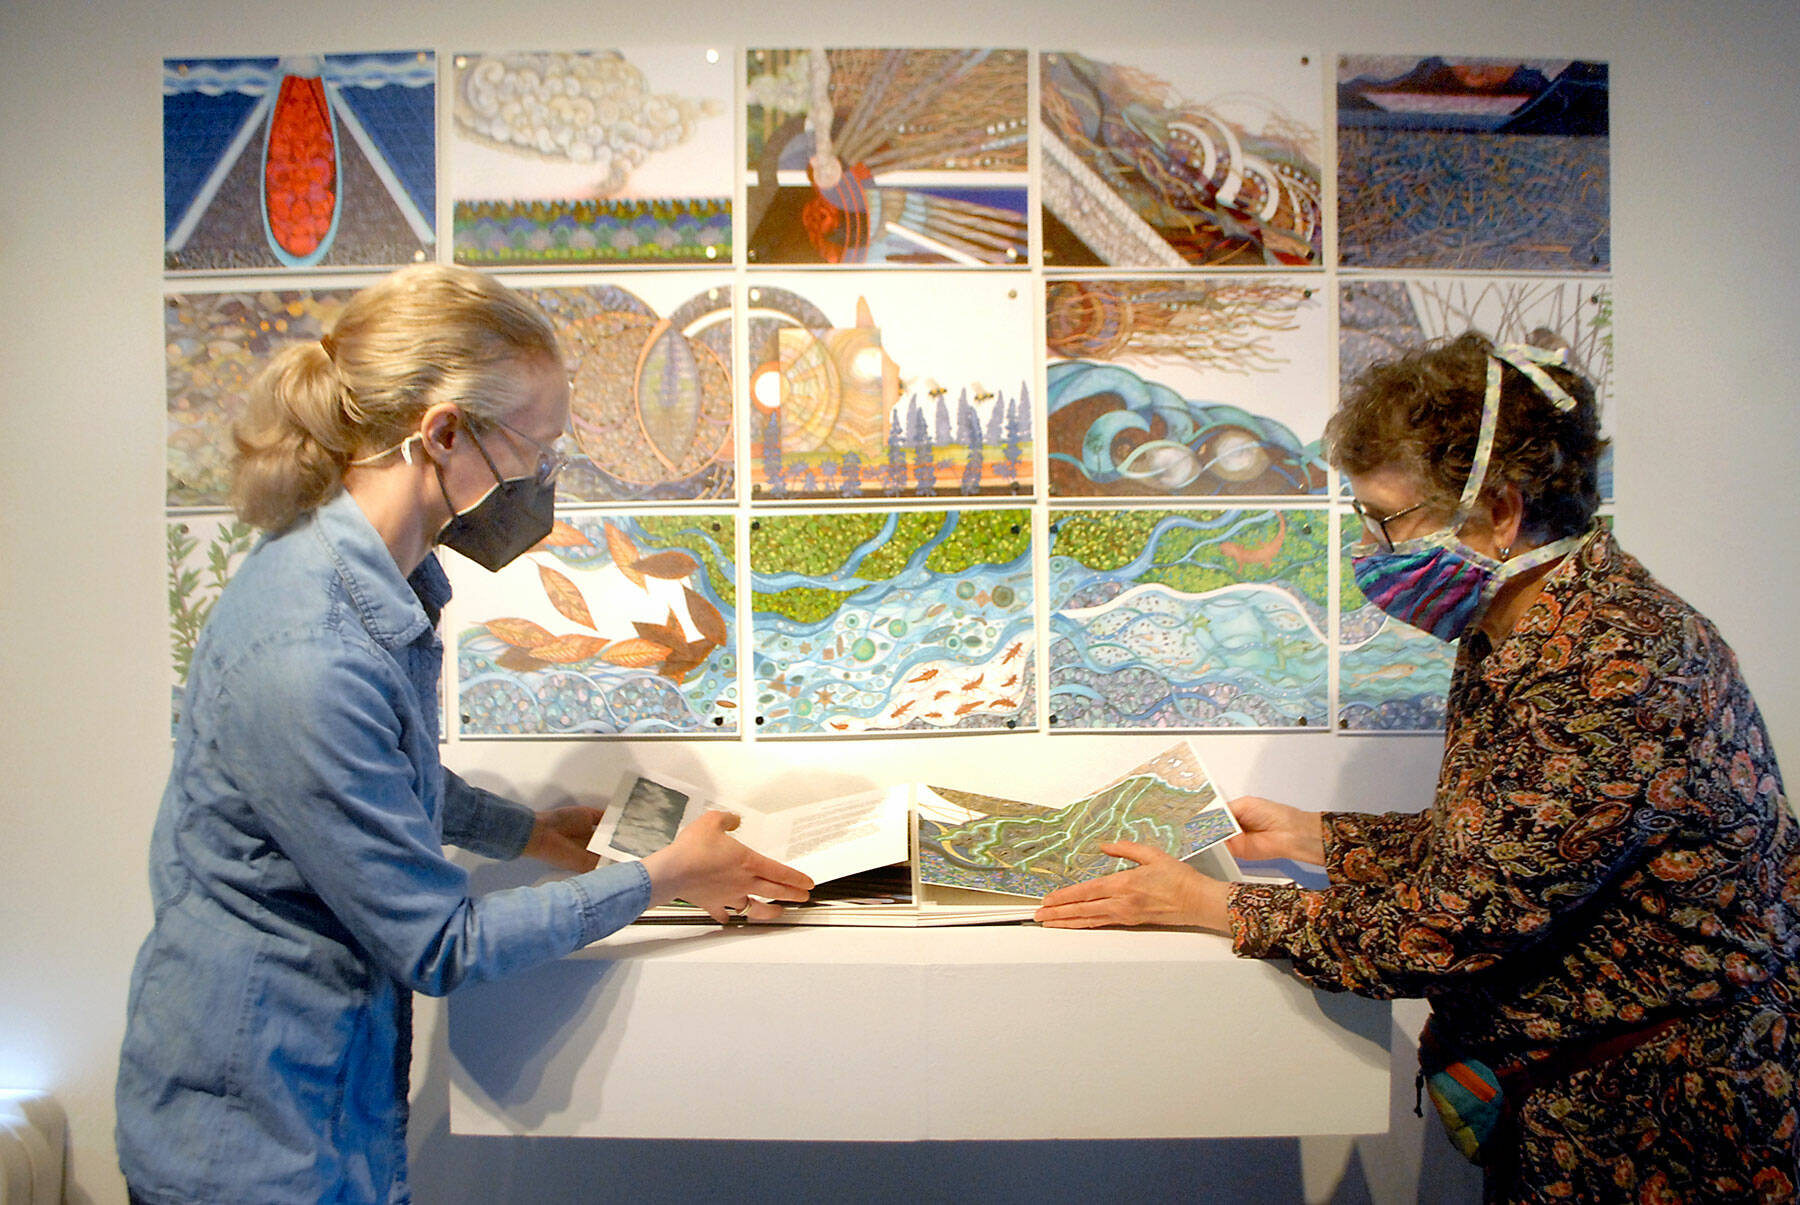 Gallery director Sarah Jane, left, and exhibit co-curator Lucia Harrison of Tacoma arrange a display that will be included in the exhibition “Science Stories: A Collaboration of Book Artists and Scientists,” which opens Friday at the Port Angeles Fine Arts Center. (Keith Thorpe/Peninsula Daily News)